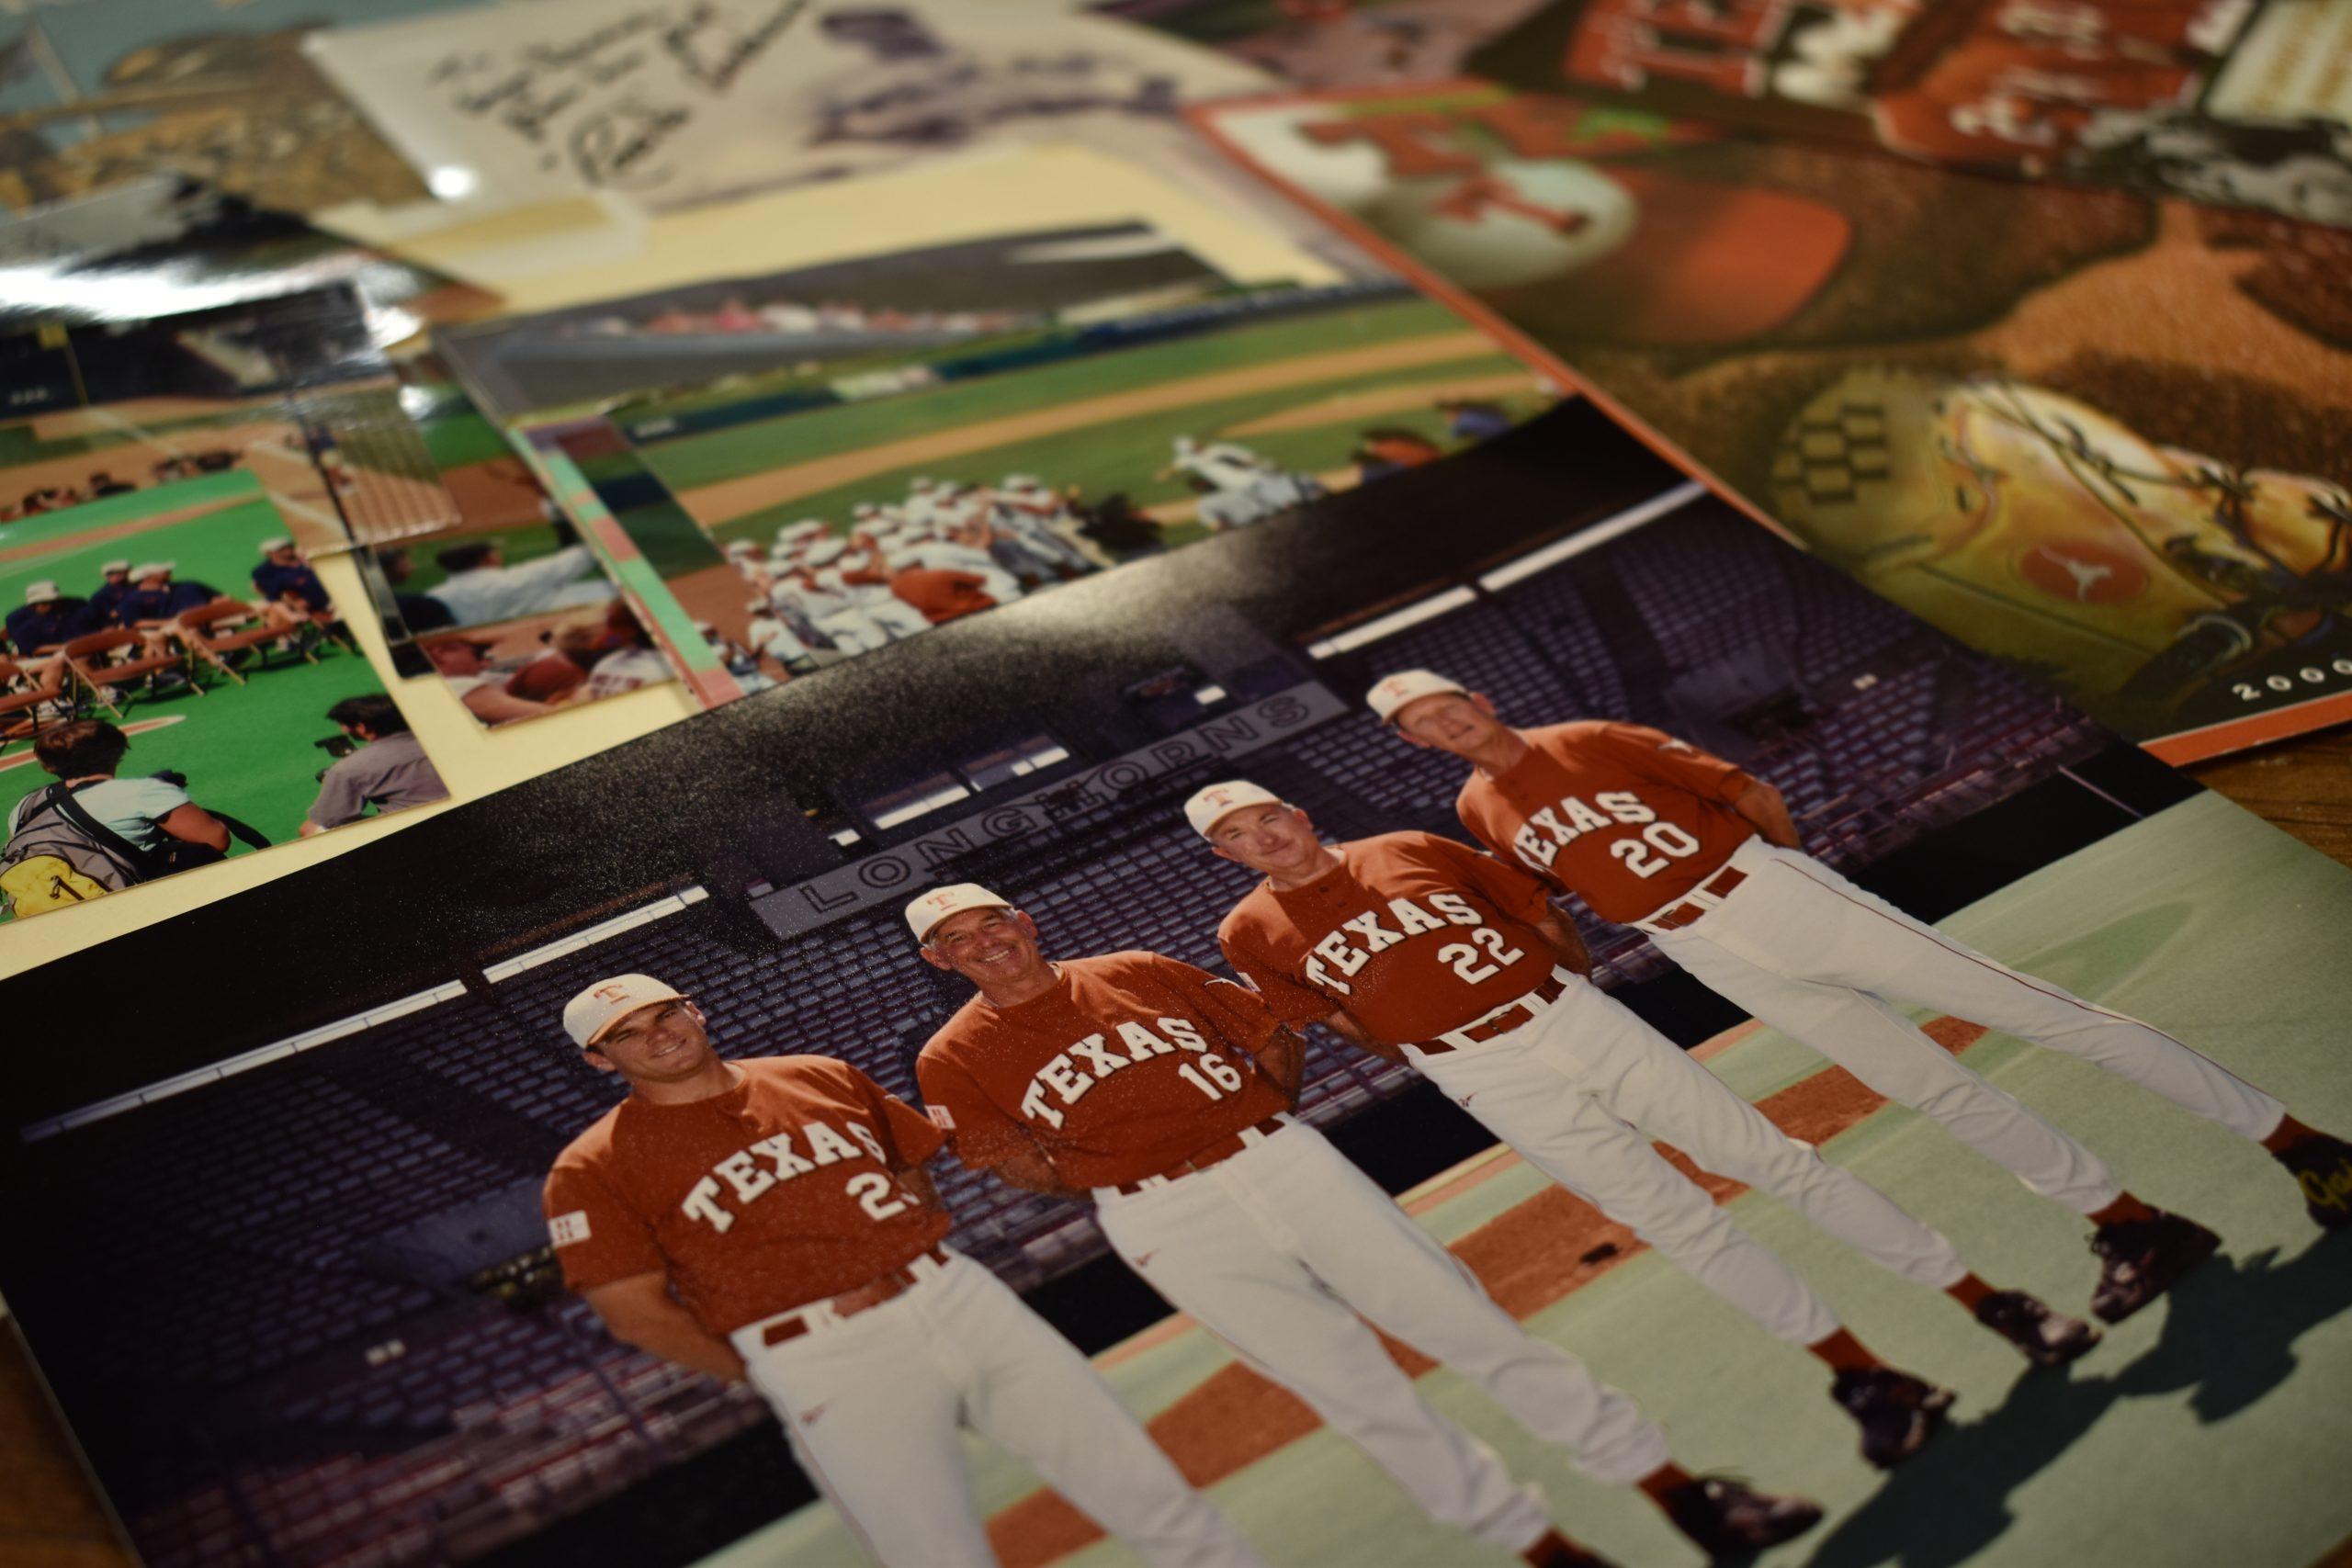 Photos from Augie Garrido's collection